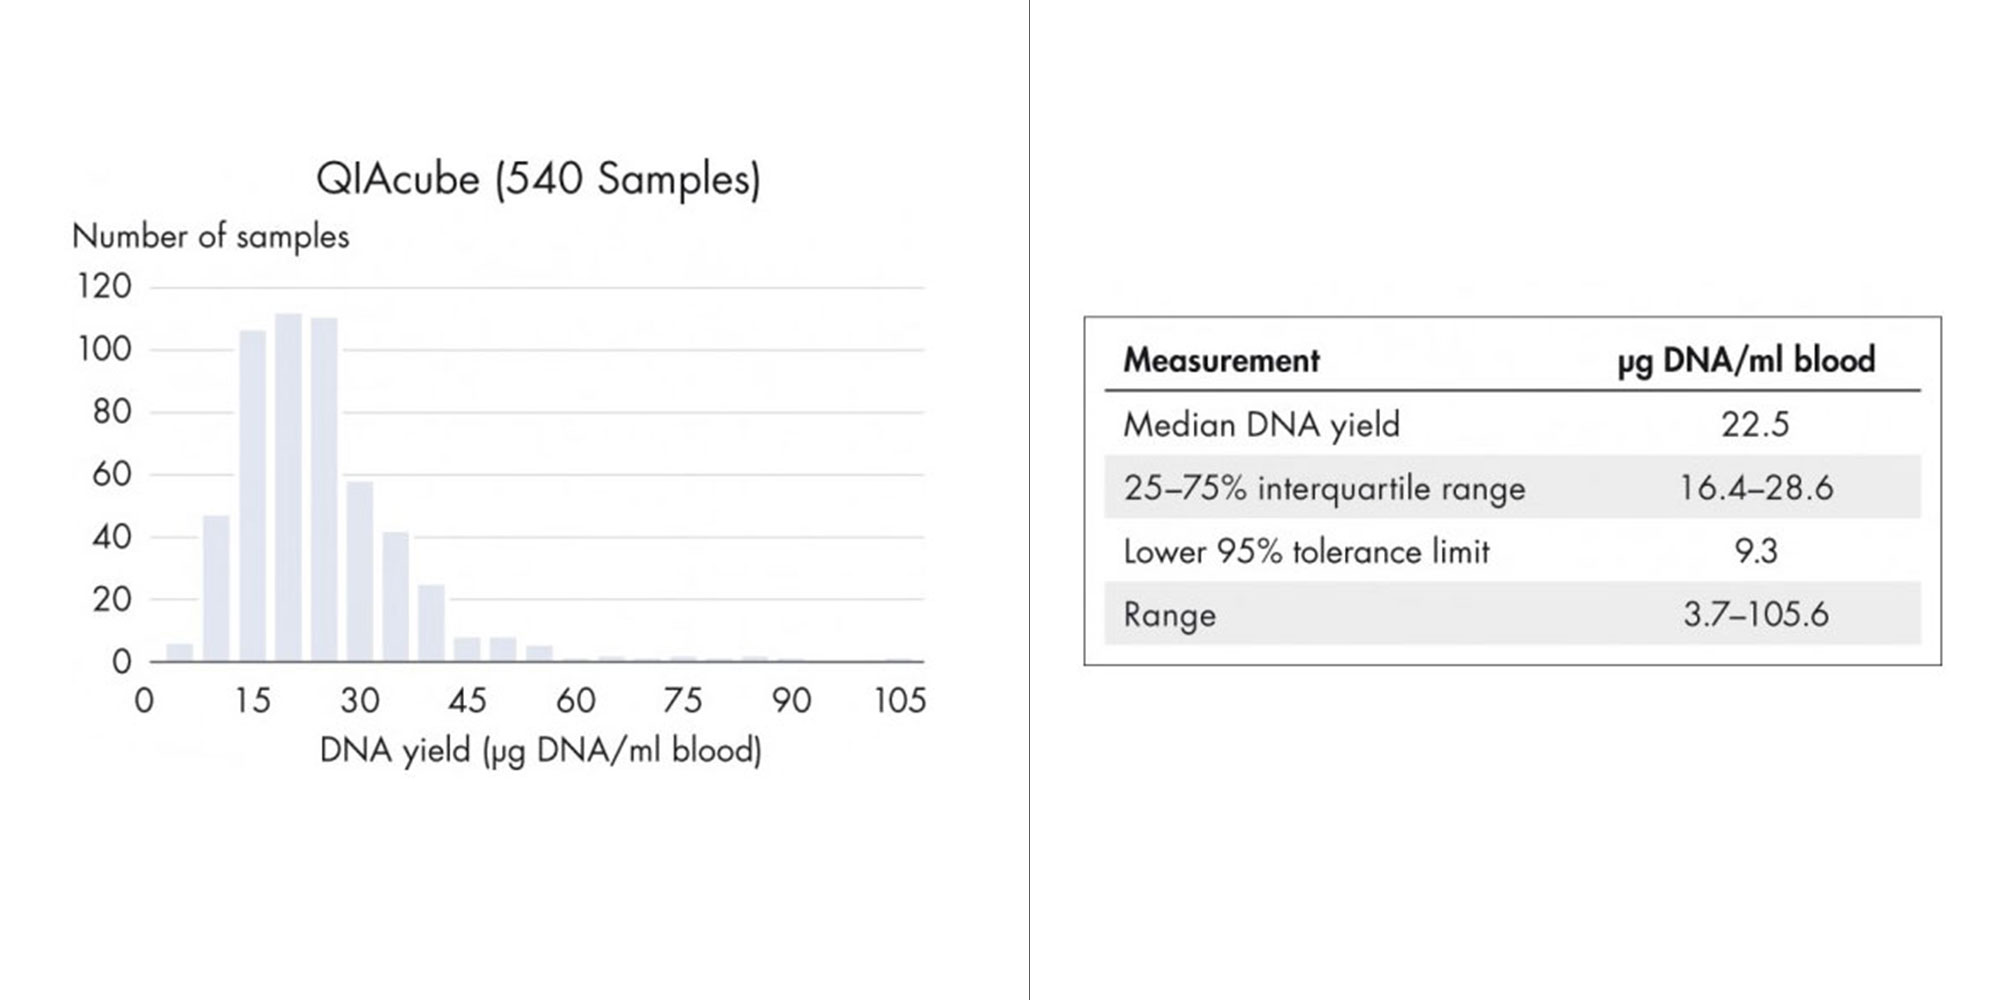 Samples collected in PAXgene Blood DNA Tubes (IVD) were processed at 5 sites (4 external, 1 internal) on the QIAcube, which performs automated DNA extraction based on silica membrane technology. Median DNA yield was 22.5 µg DNA/ml blood, with 95% of samples ≥9.3 µg DNA/ml blood. DNA purity is high, with an A260/A280 ratio of 1.7–2.1. Extraction was performed using QIAamp DSP DNA Blood Mini Kits (200 µl blood sample input, 100 µl DNA eluate output).